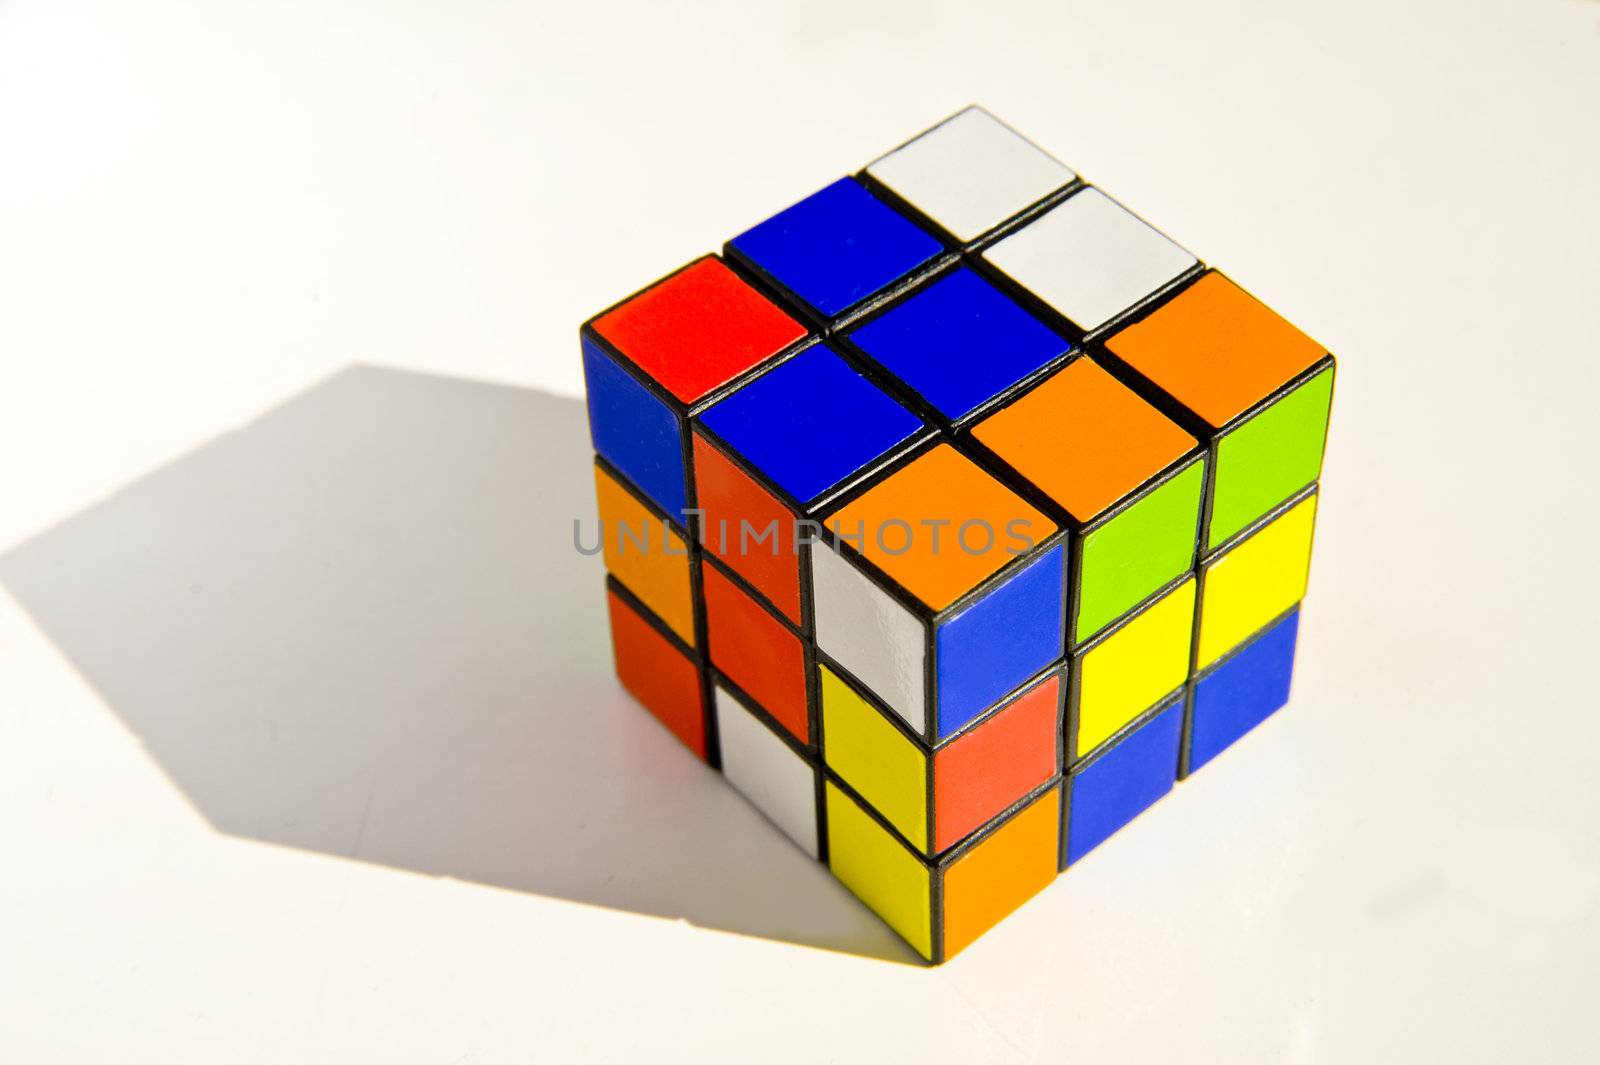 Rubik's cube over white background with gray shade